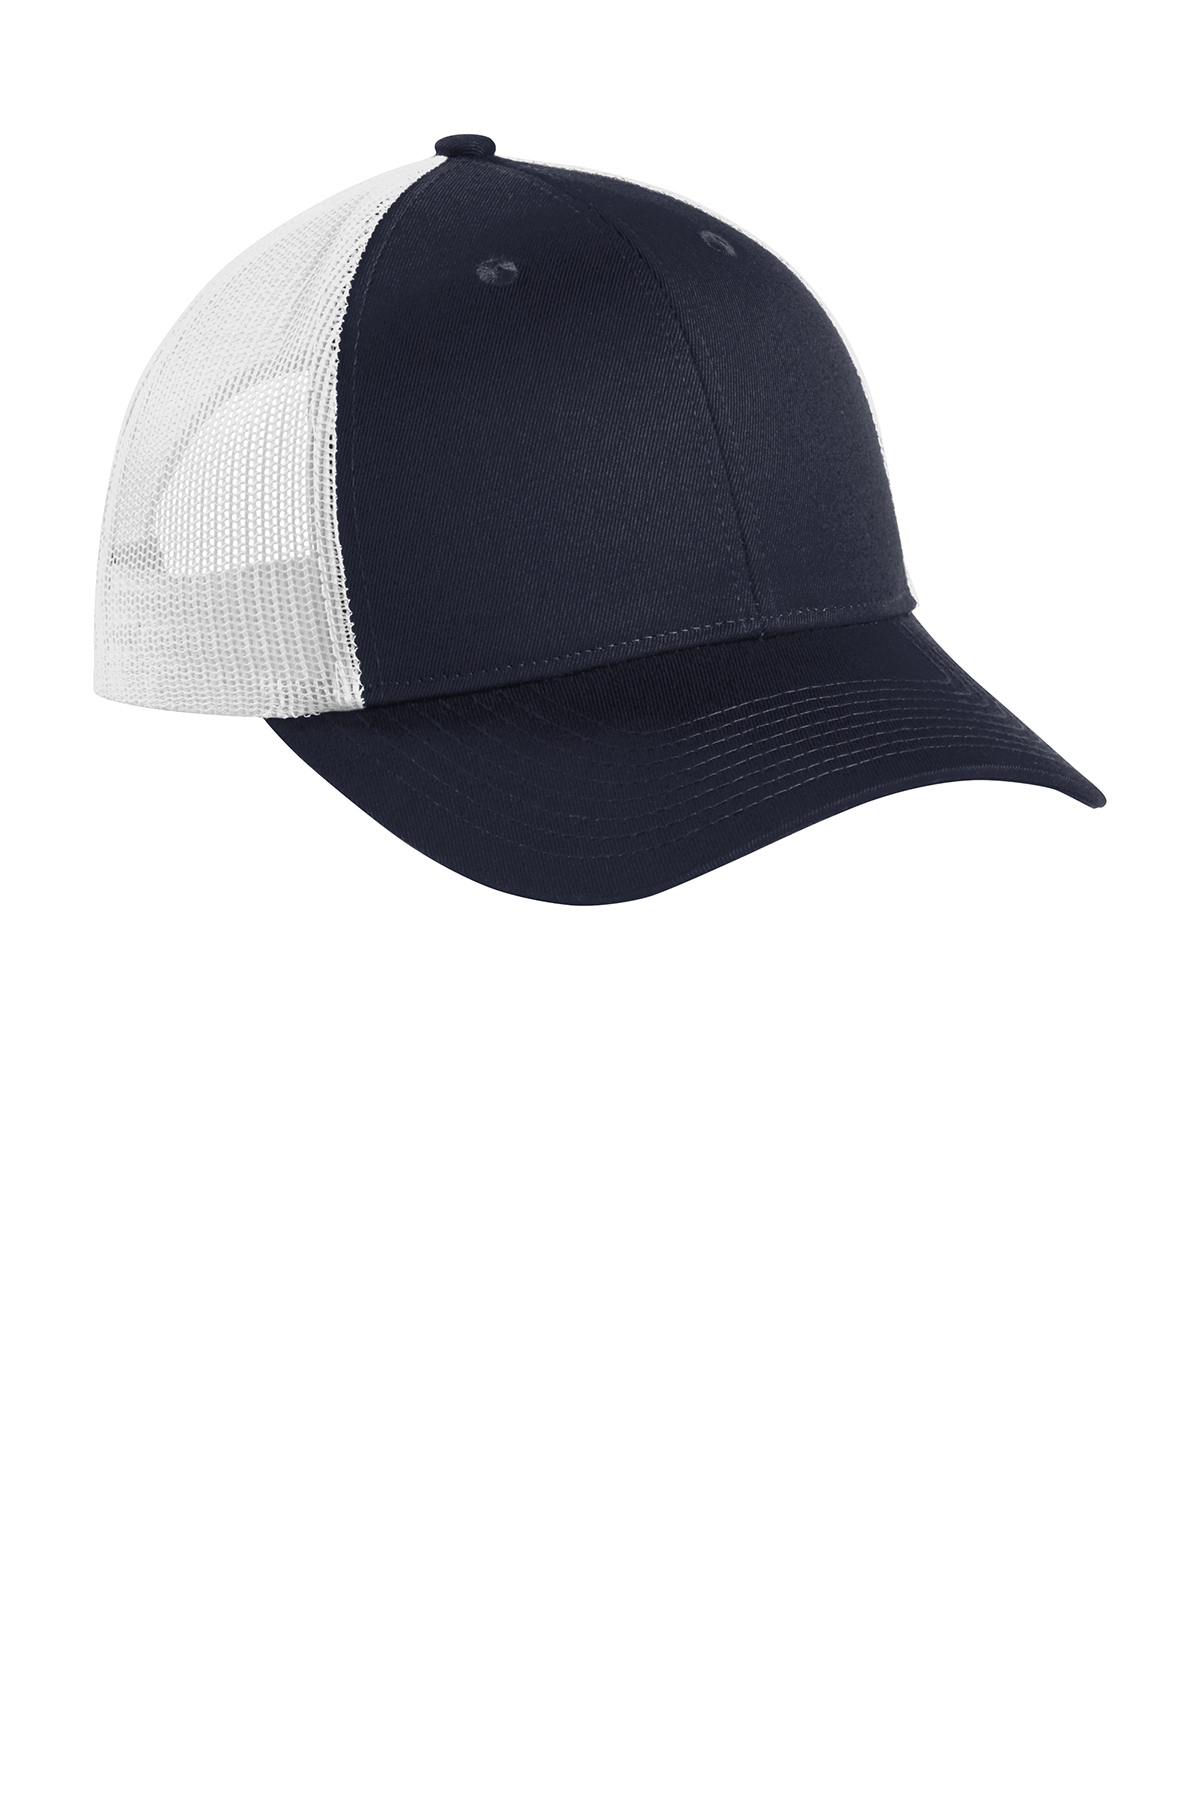 click to view Rich Navy/ White